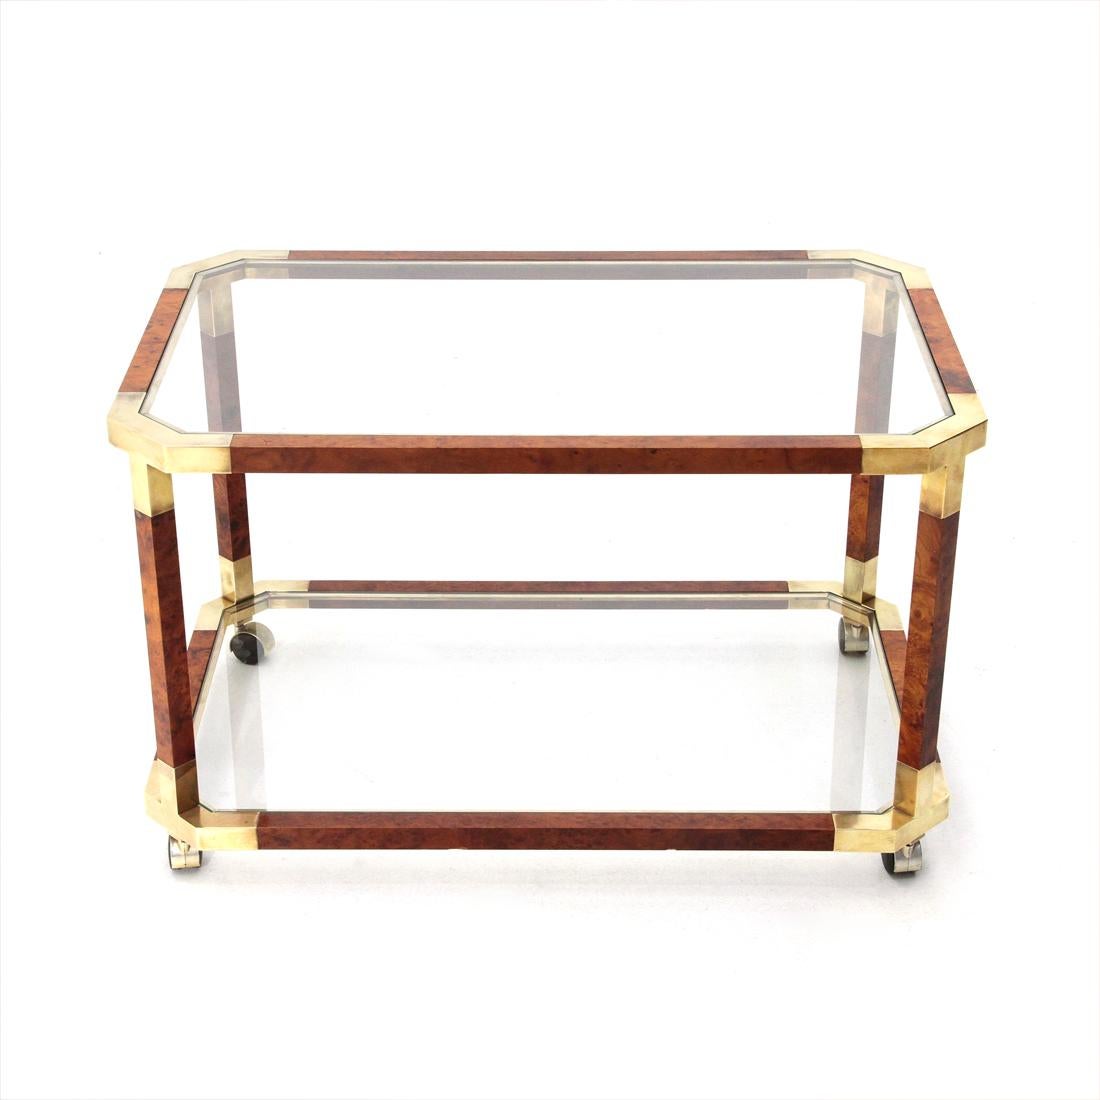 Italian manufacture cart produced in the 1980s.
Structure formed by strips of wood veneered with briar.
Corner joints in brass band.
Glass tops.
Plastic wheels.
Good general conditions, some signs due to normal use over time.

Dimensions: